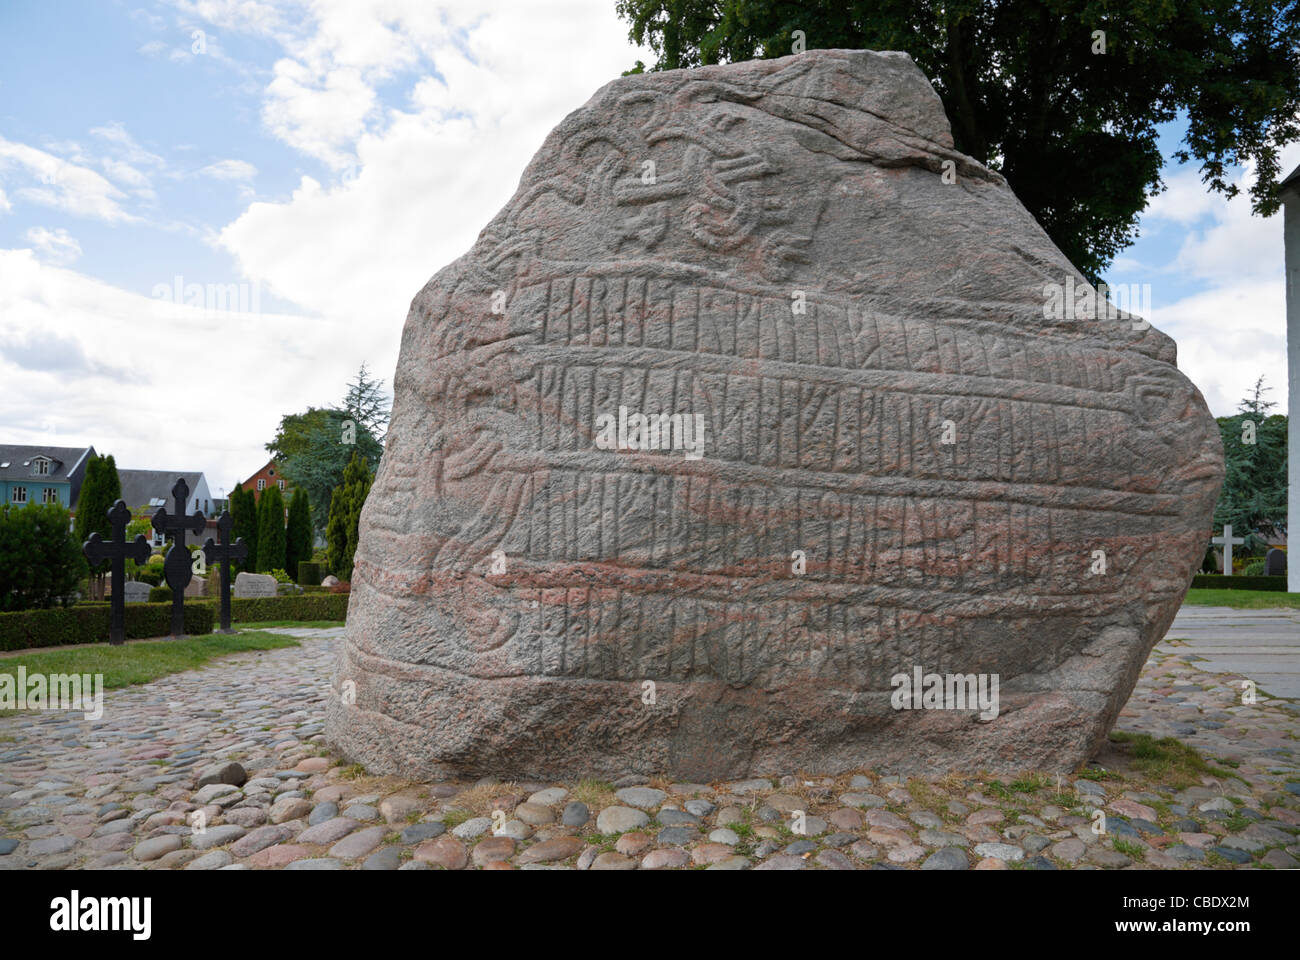 Runic inscription on the large Jelling rune stone from the tenth century raised by King Harald Bluetooth in Jelling. Figure of Jesus on other side Stock Photo